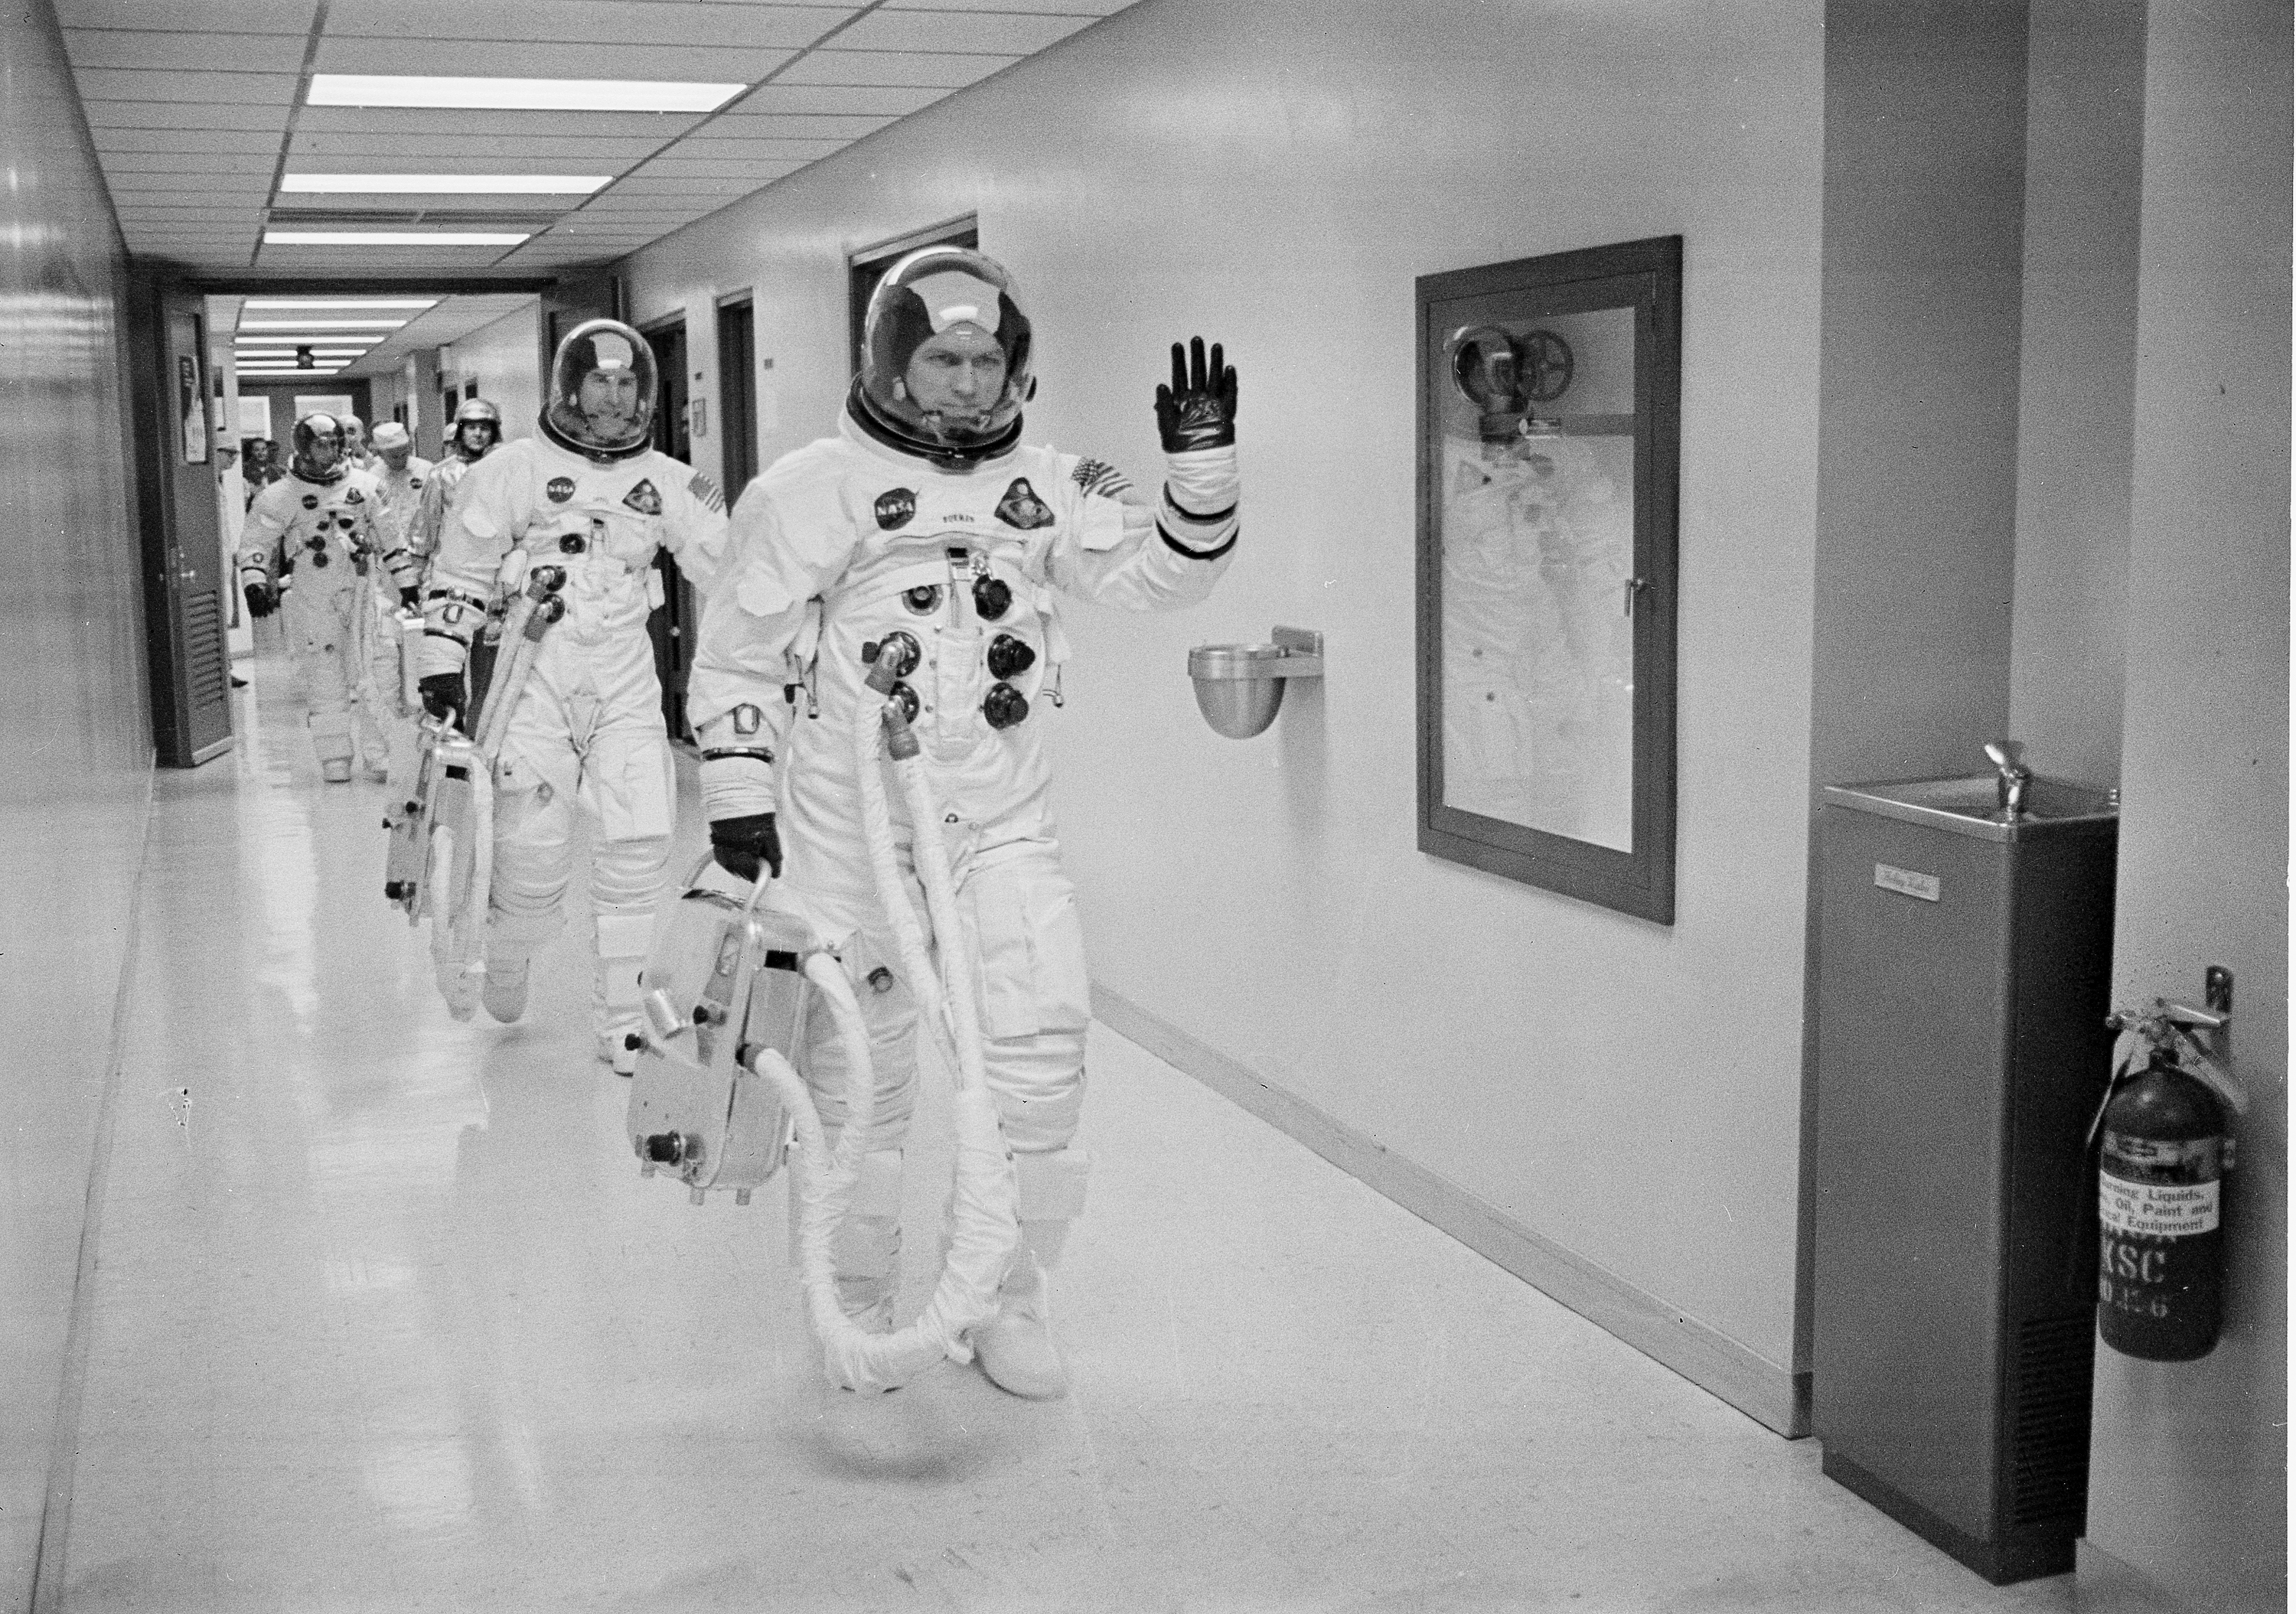 Trio of men in spacesuits walking down a hall.